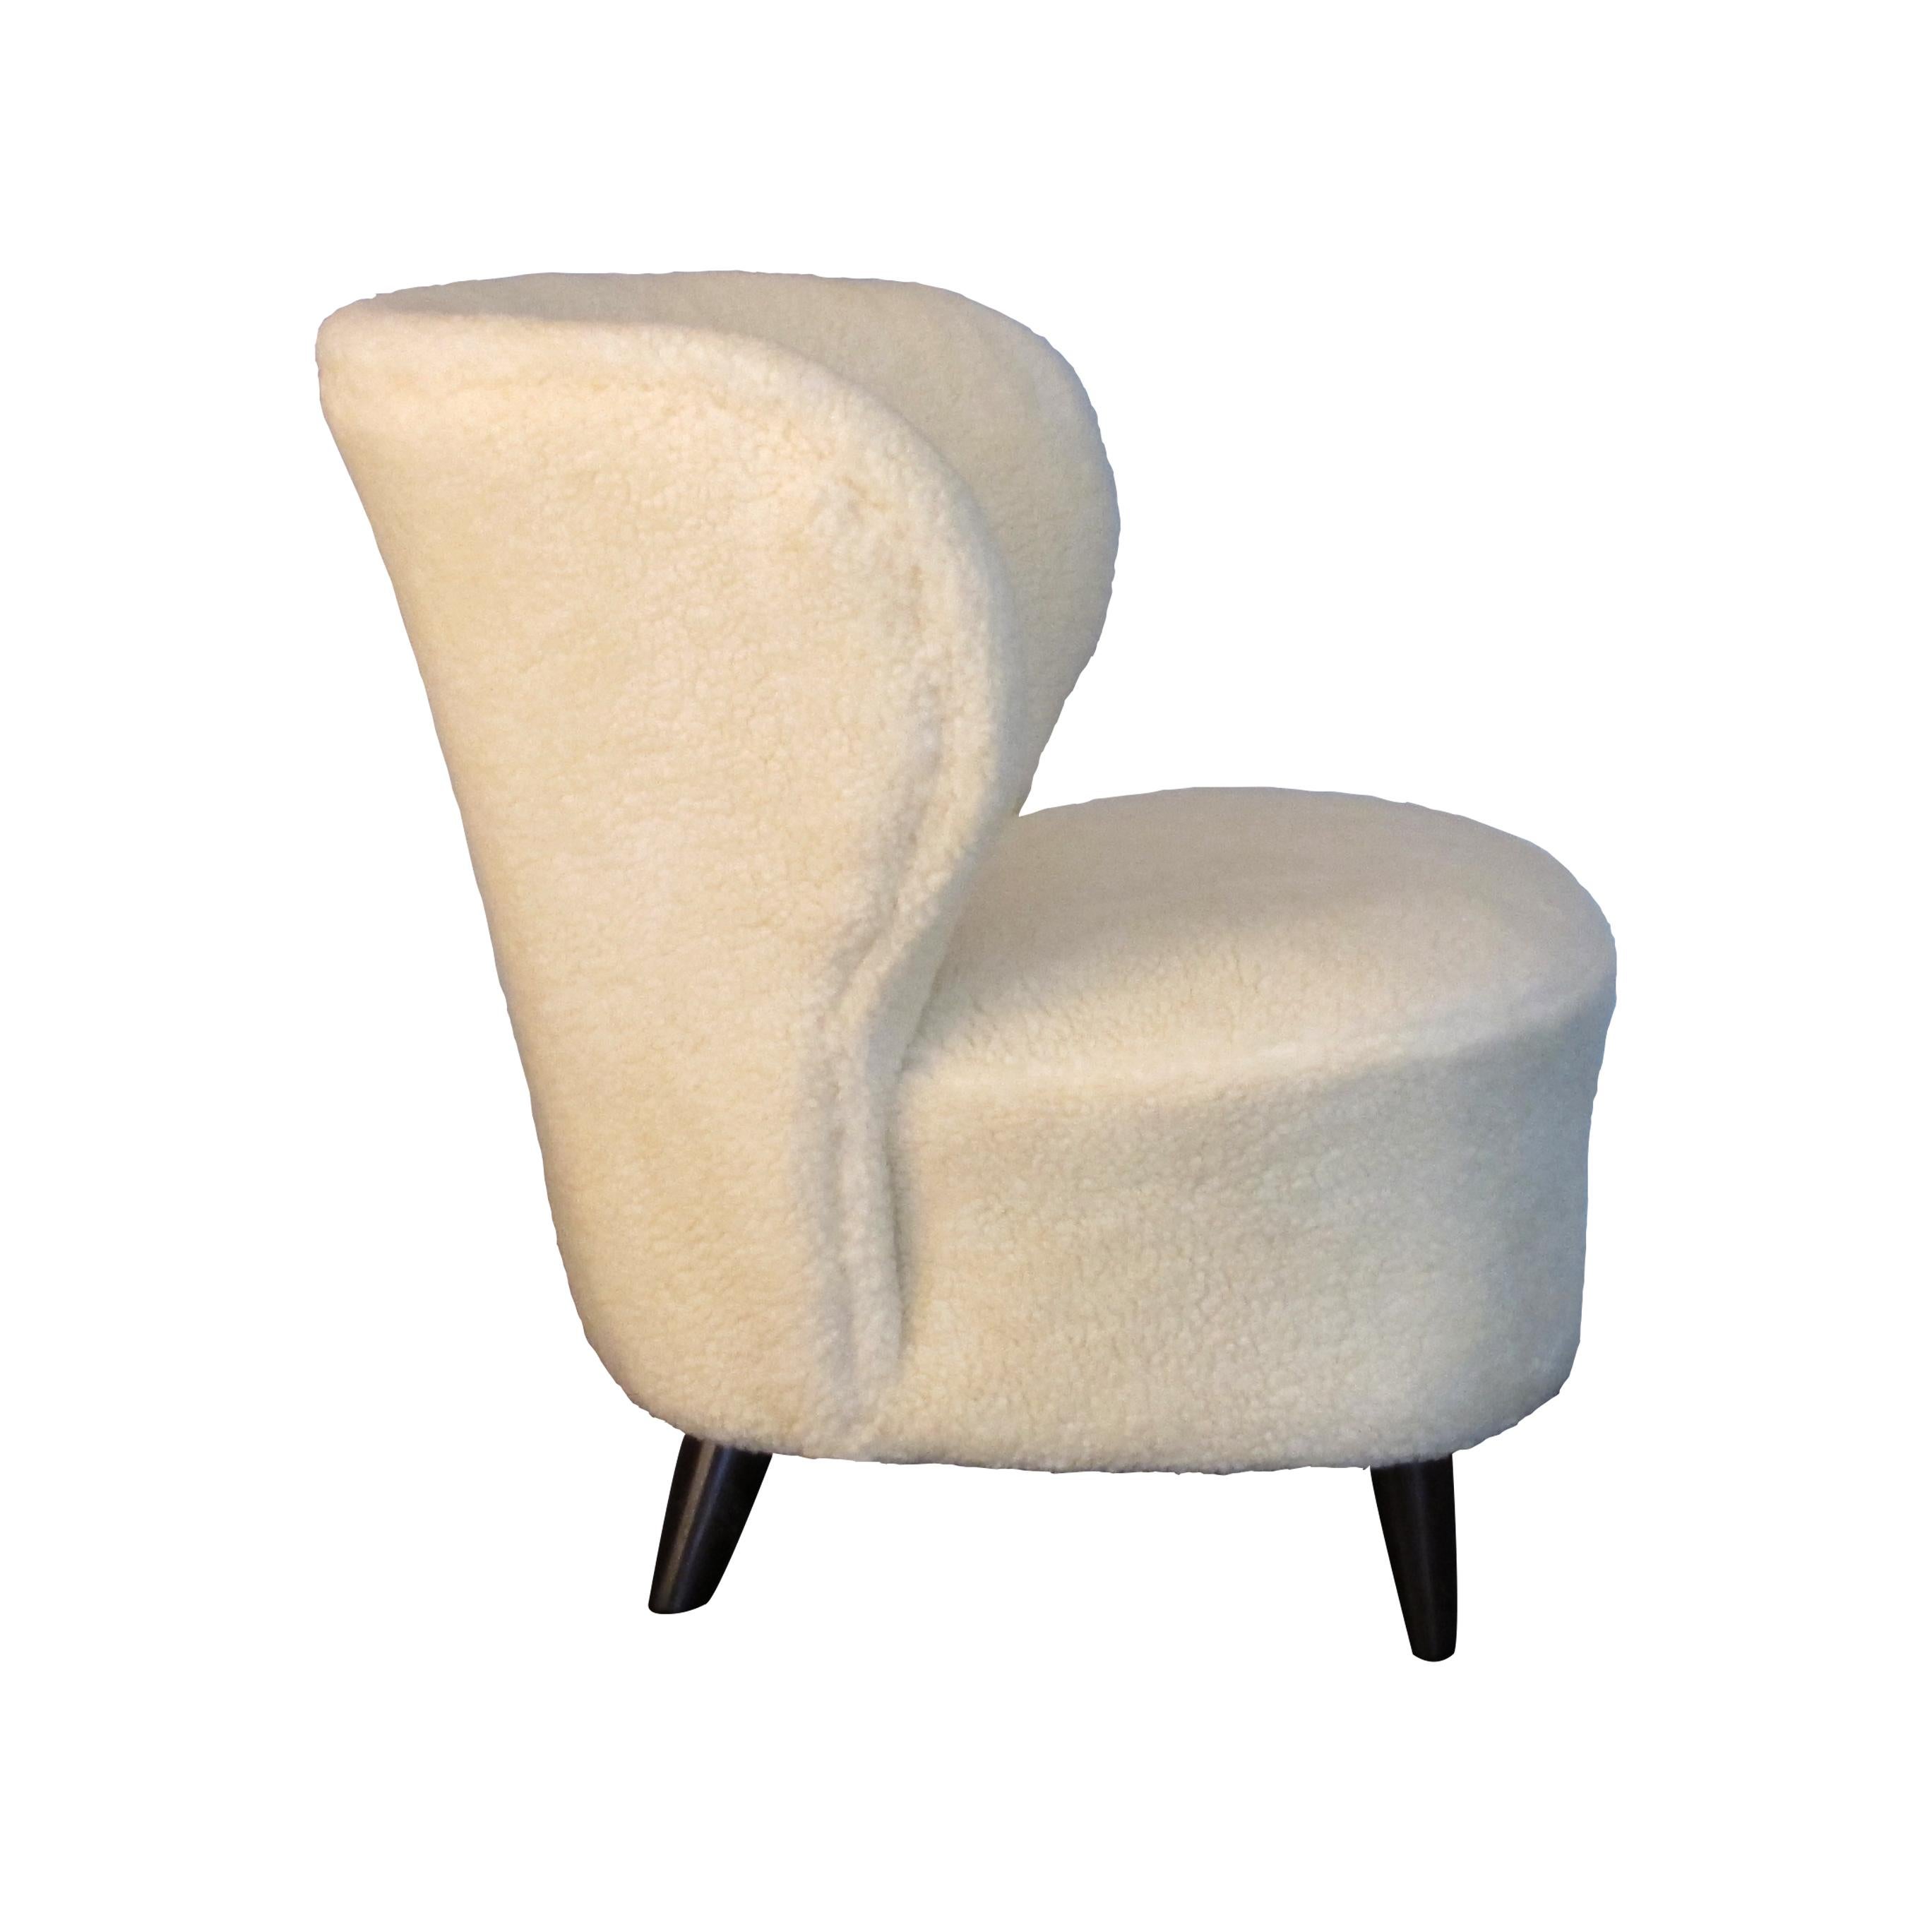 Mid-20th Century Pair of 1940s Finnish Curved Wingback Lounge Armchairs in Soft Lambskin Fabric